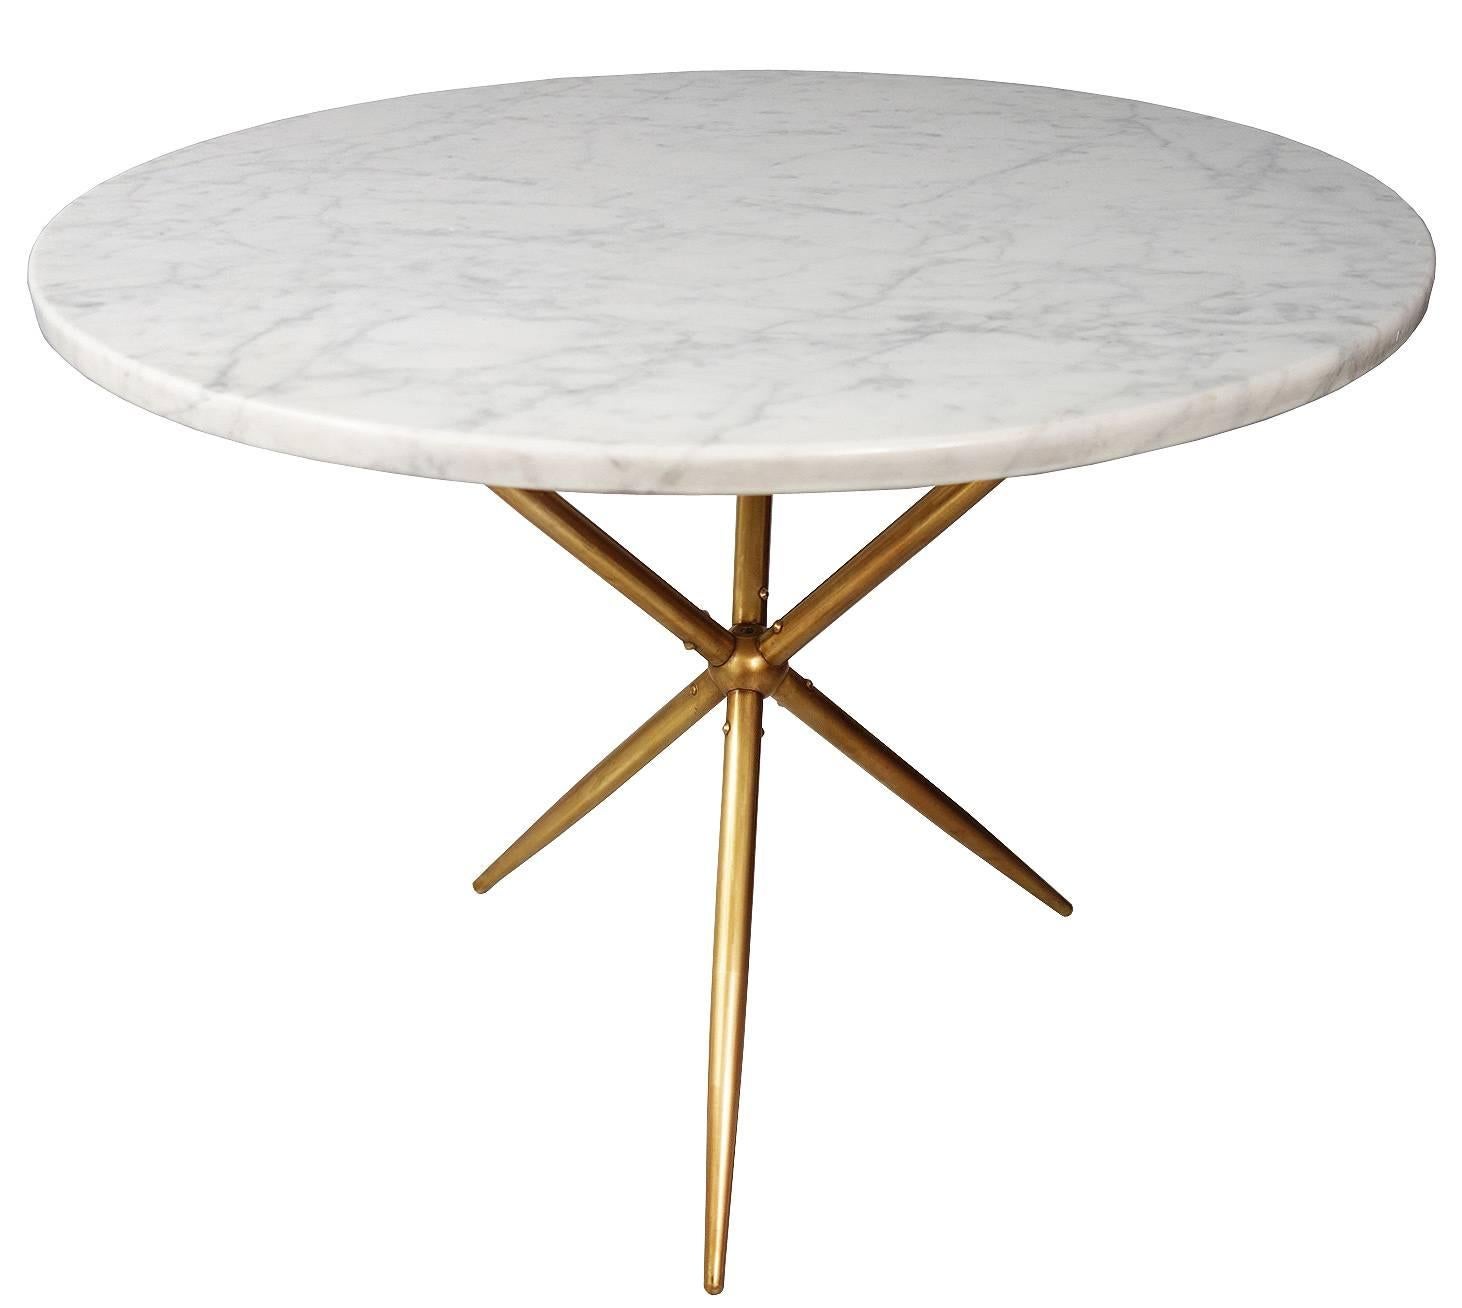 Attributed to Gio Ponti. Sputnik style marble side table on a solid brass base. Possibly gold-plated. Perfect size as a cafe, or side table.